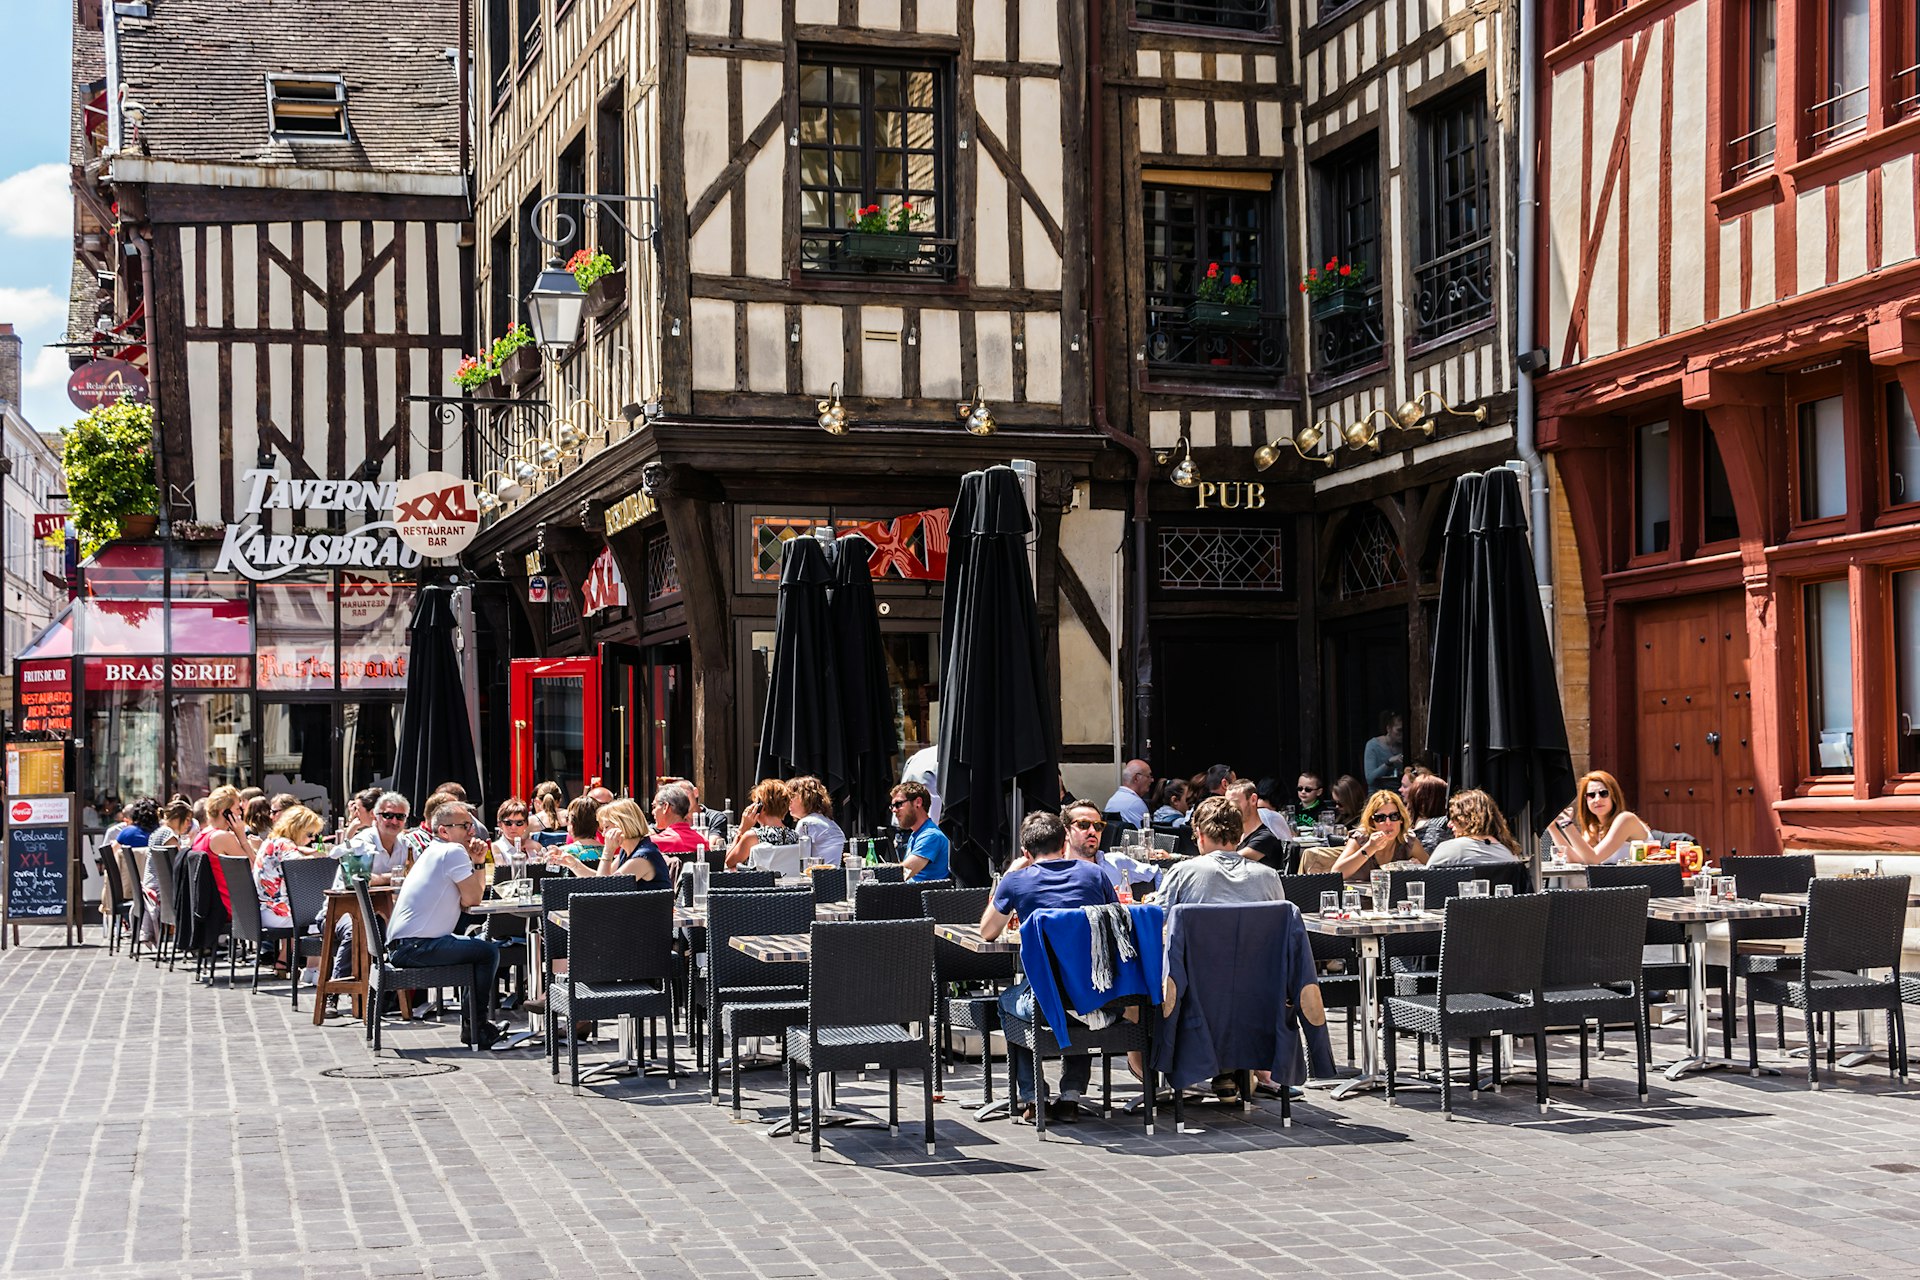 People sit at outside tables in a pedestrianized city square surrounded by historic half-timbered houses